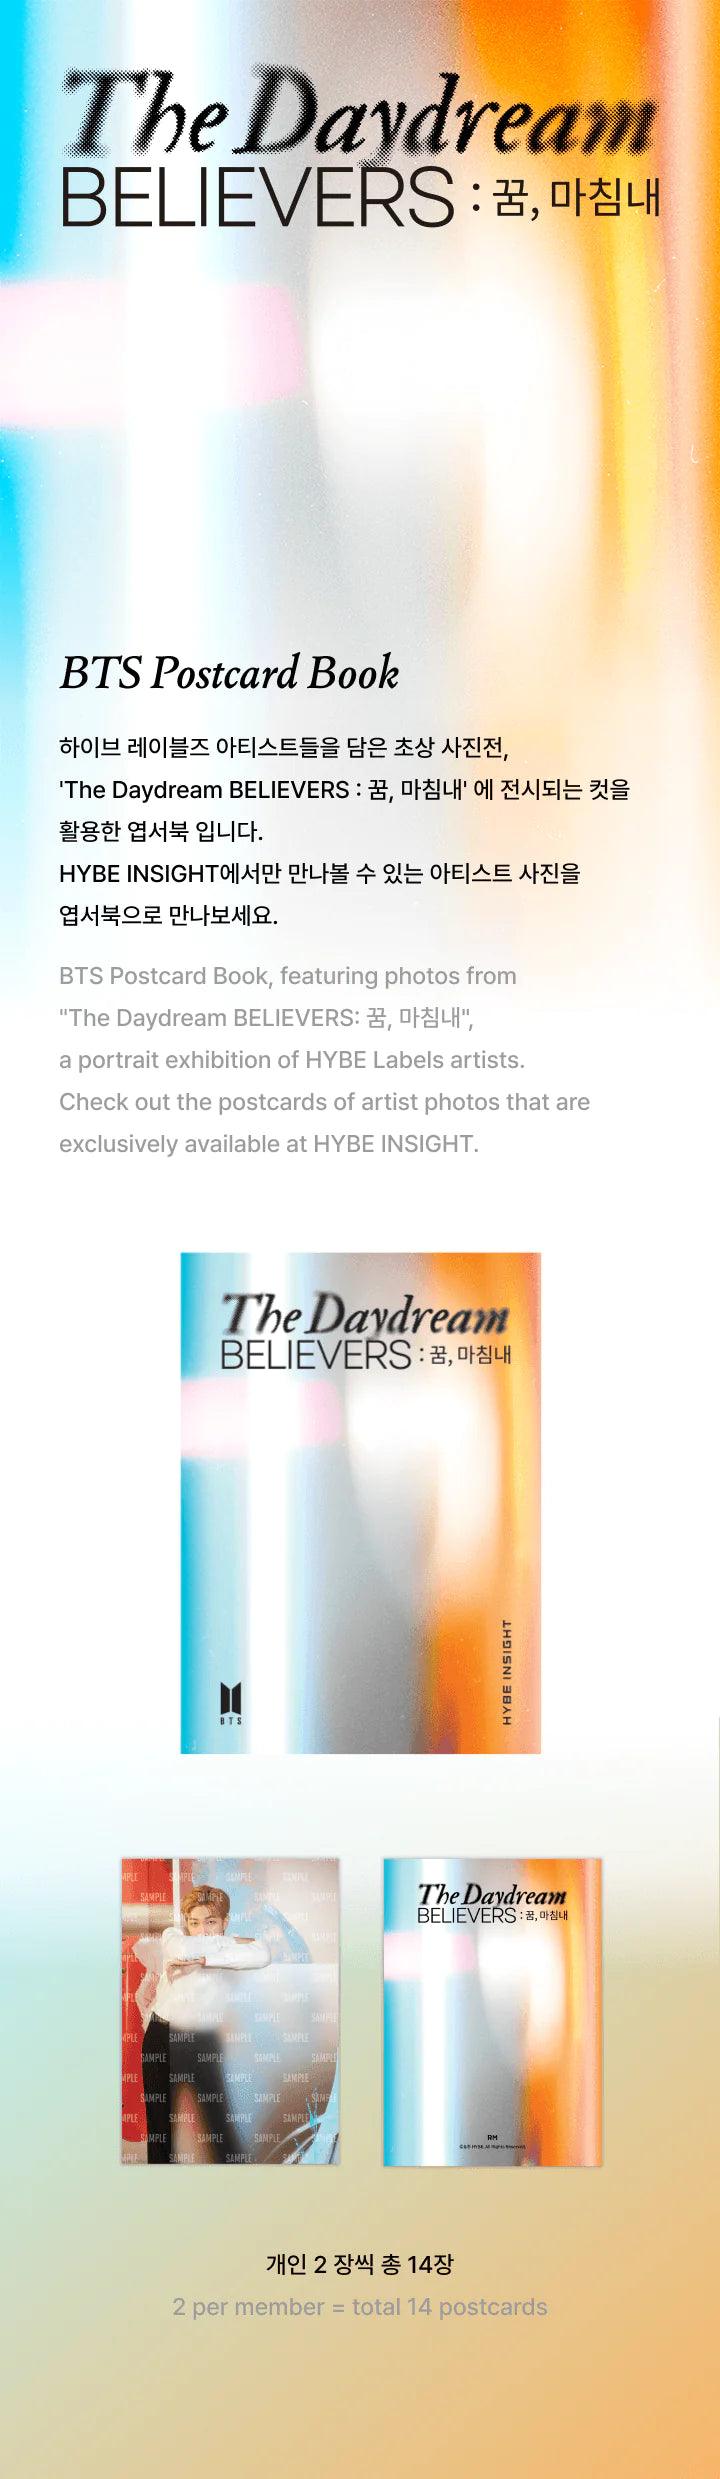 BTS - THE DAYDREAM BELIEVERS OFFICIAL MD - KAEPJJANG SHOP (캡짱 숍)